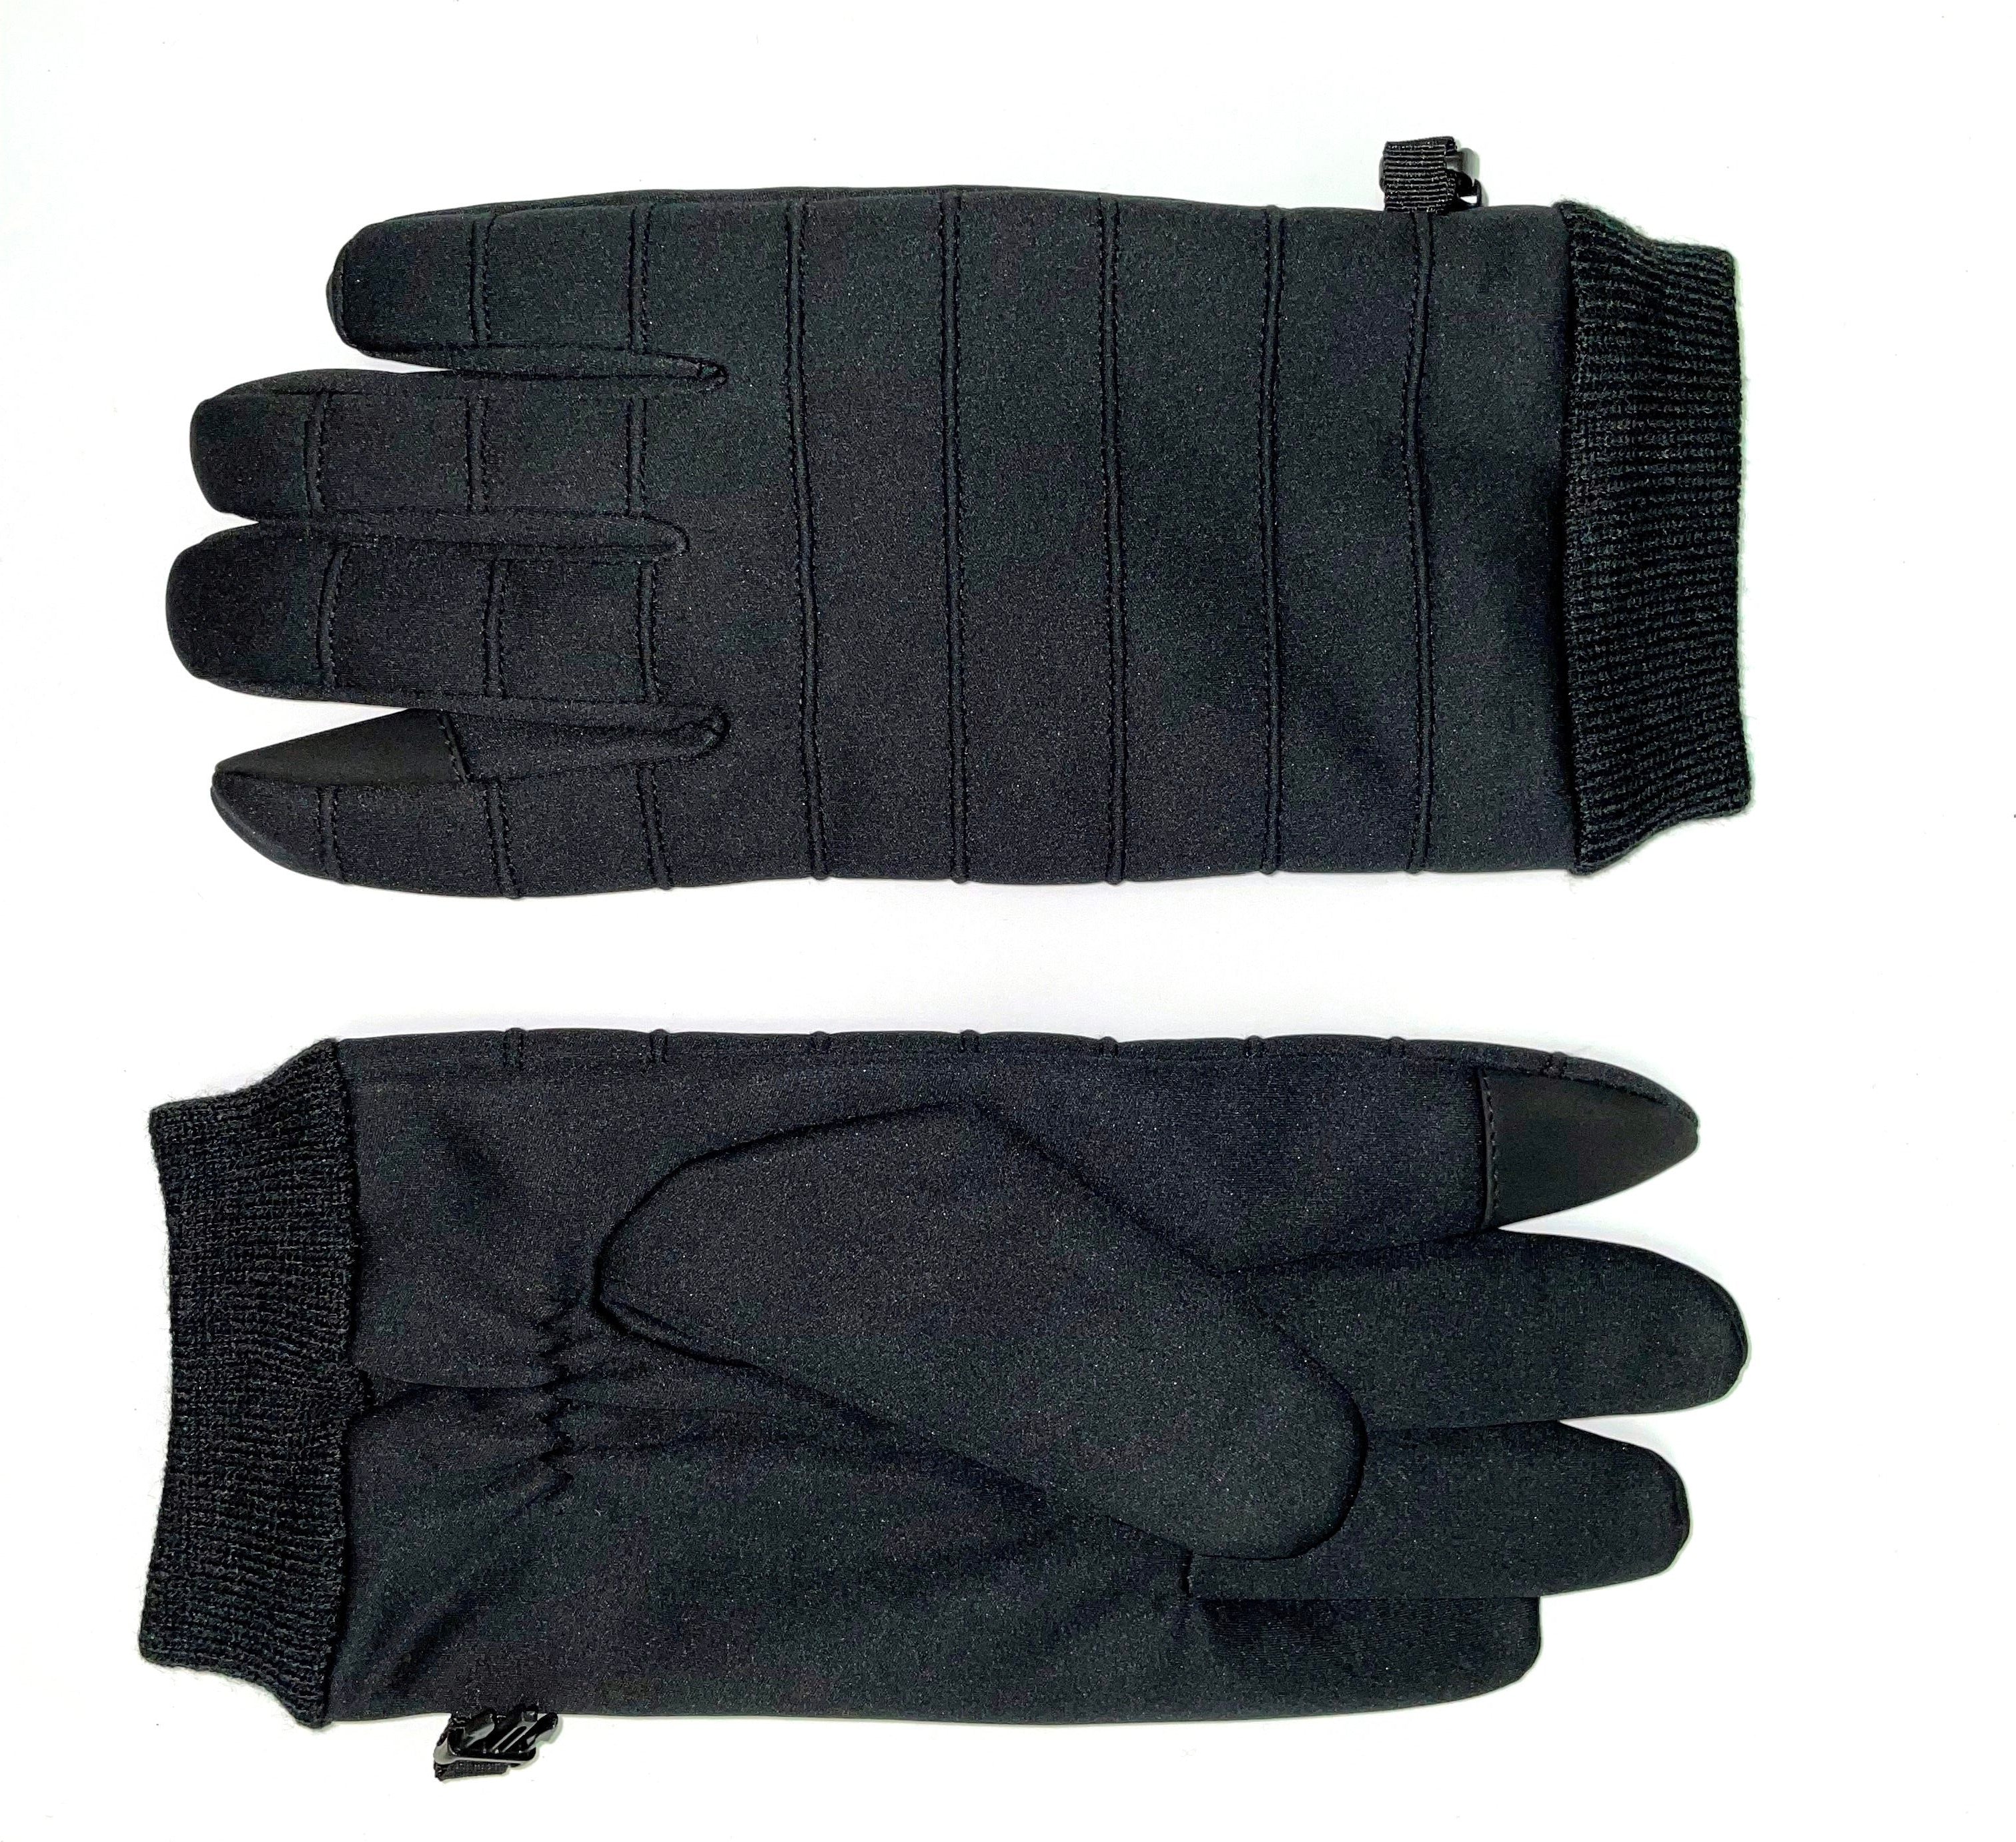 Stretch Fabric Glove With Touch Function Fleece Lined Black